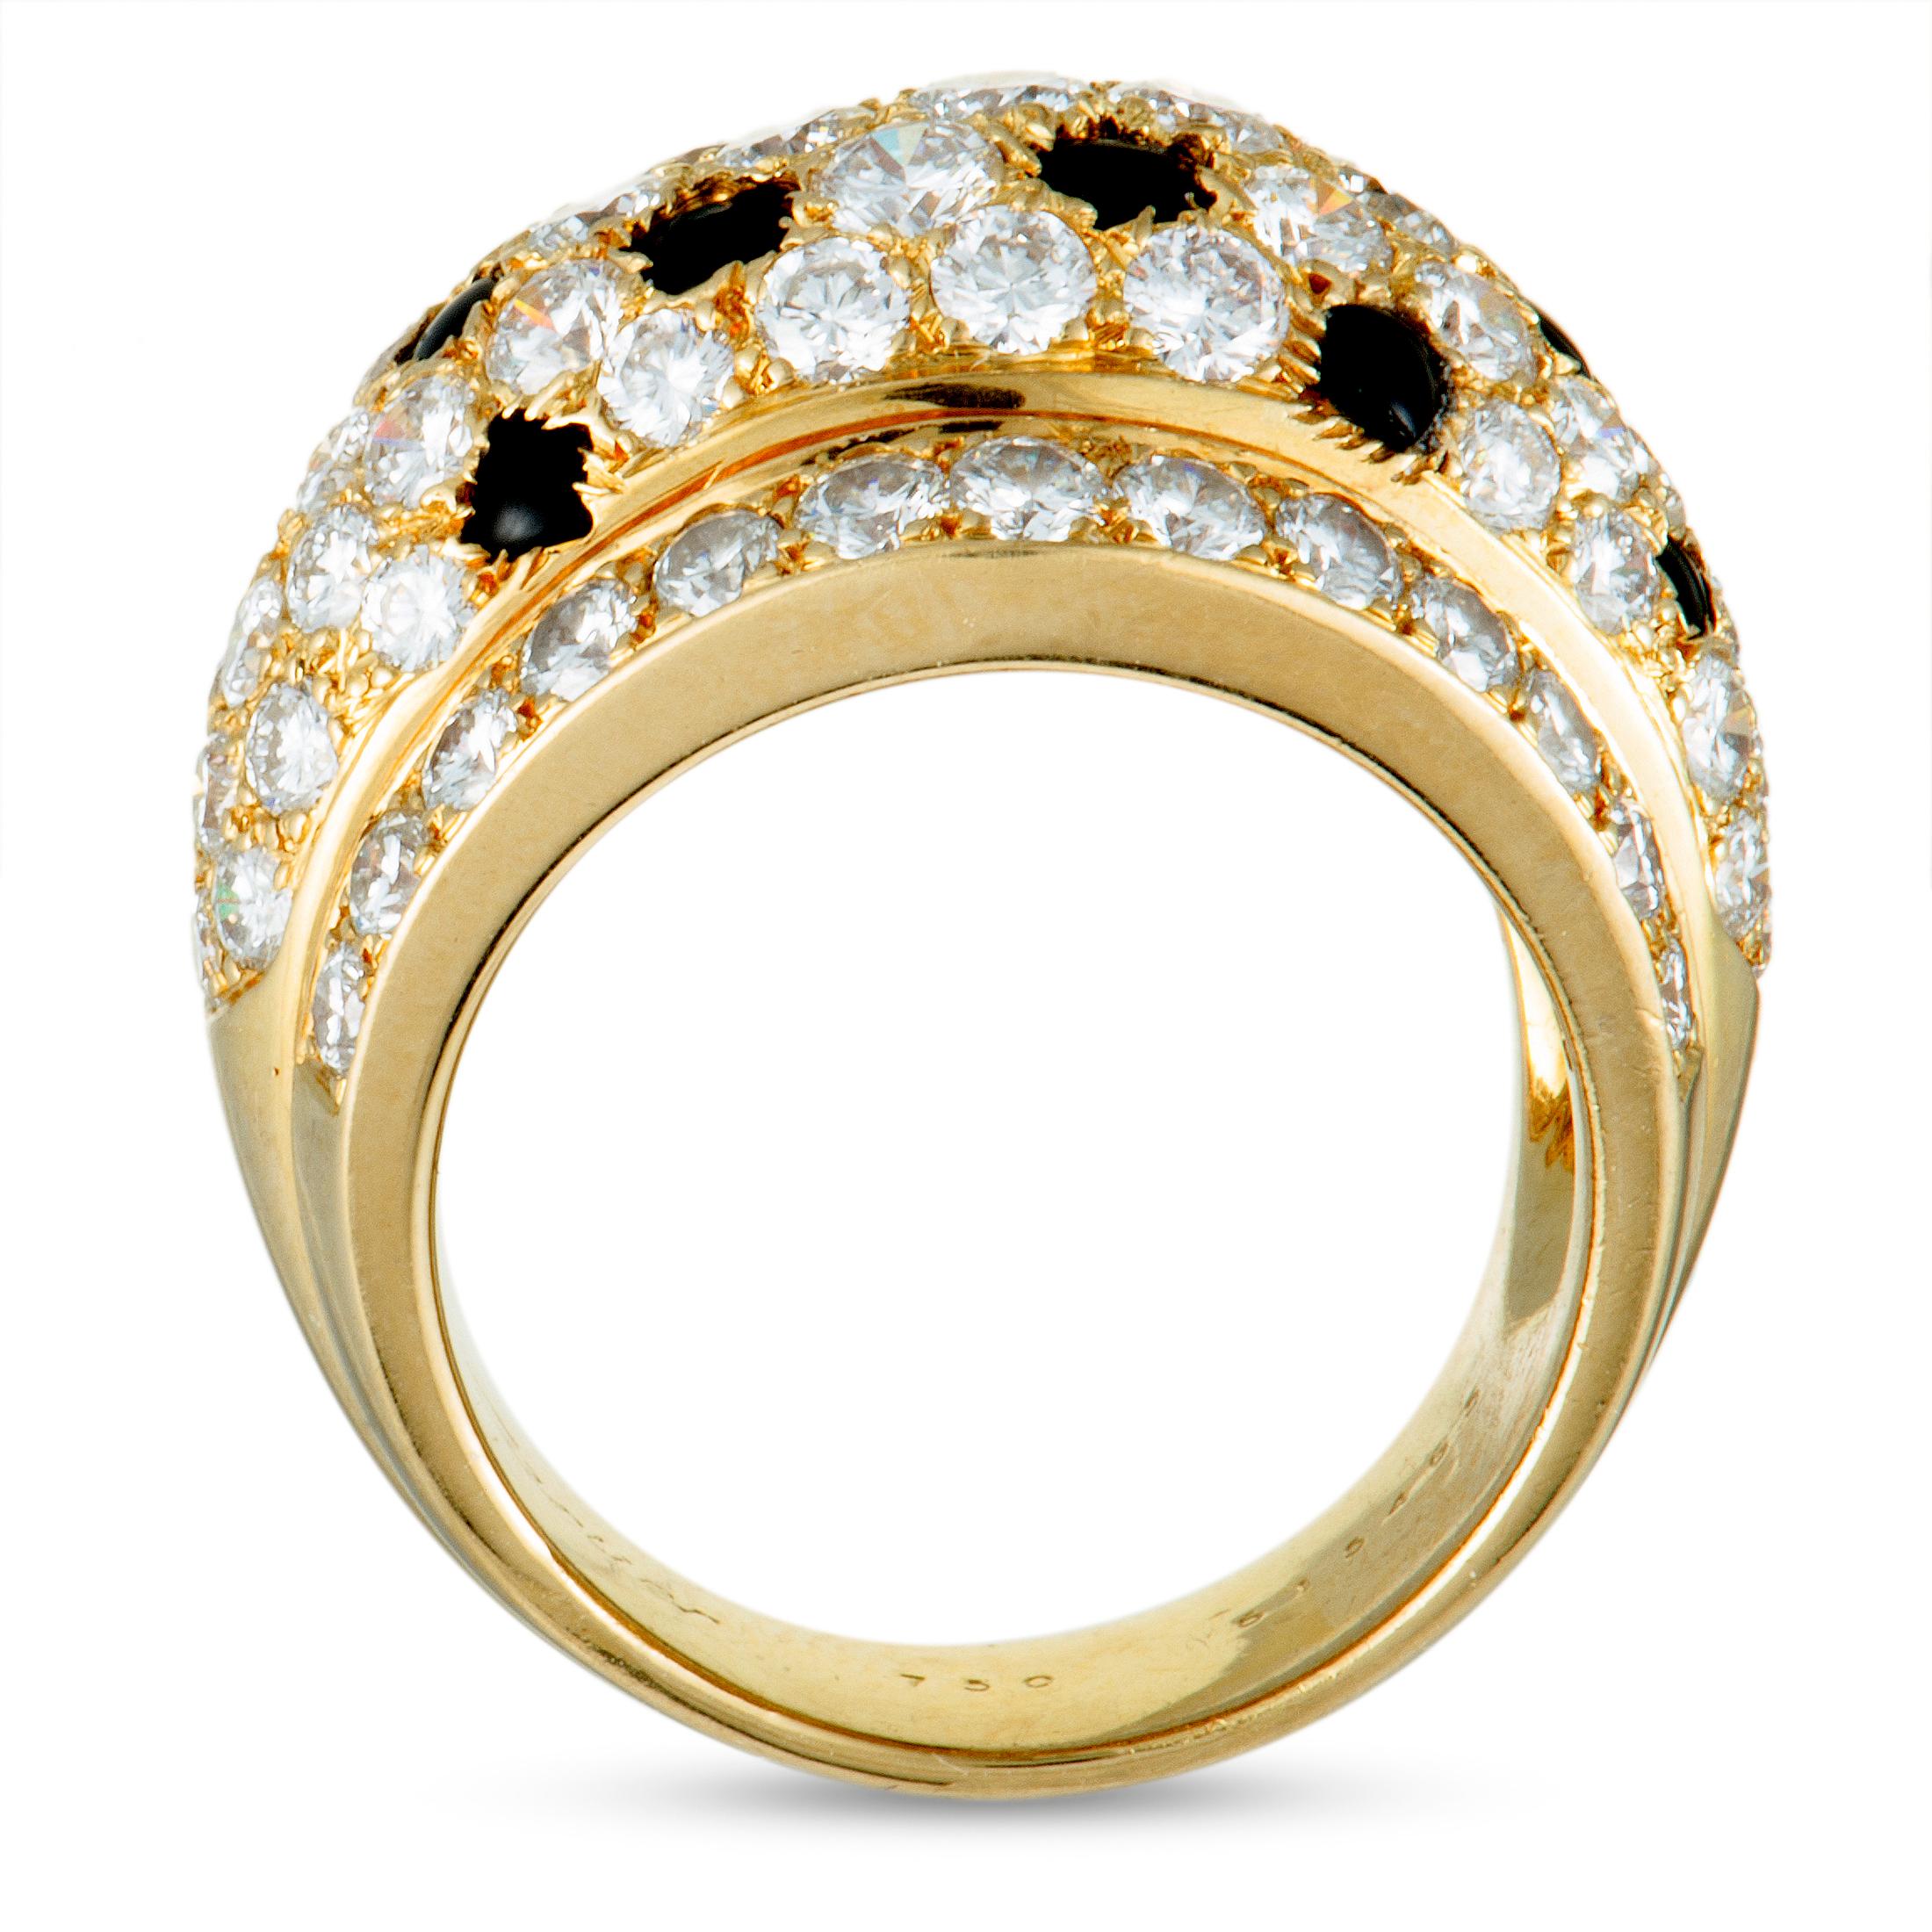 Sumptuous extravagance is embodied at its finest in this majestic ring from Cartier that features elegant design and lavish décor. The ring is exquisitely crafted from classy 18K yellow gold and expertly set with striking onyx stones and with